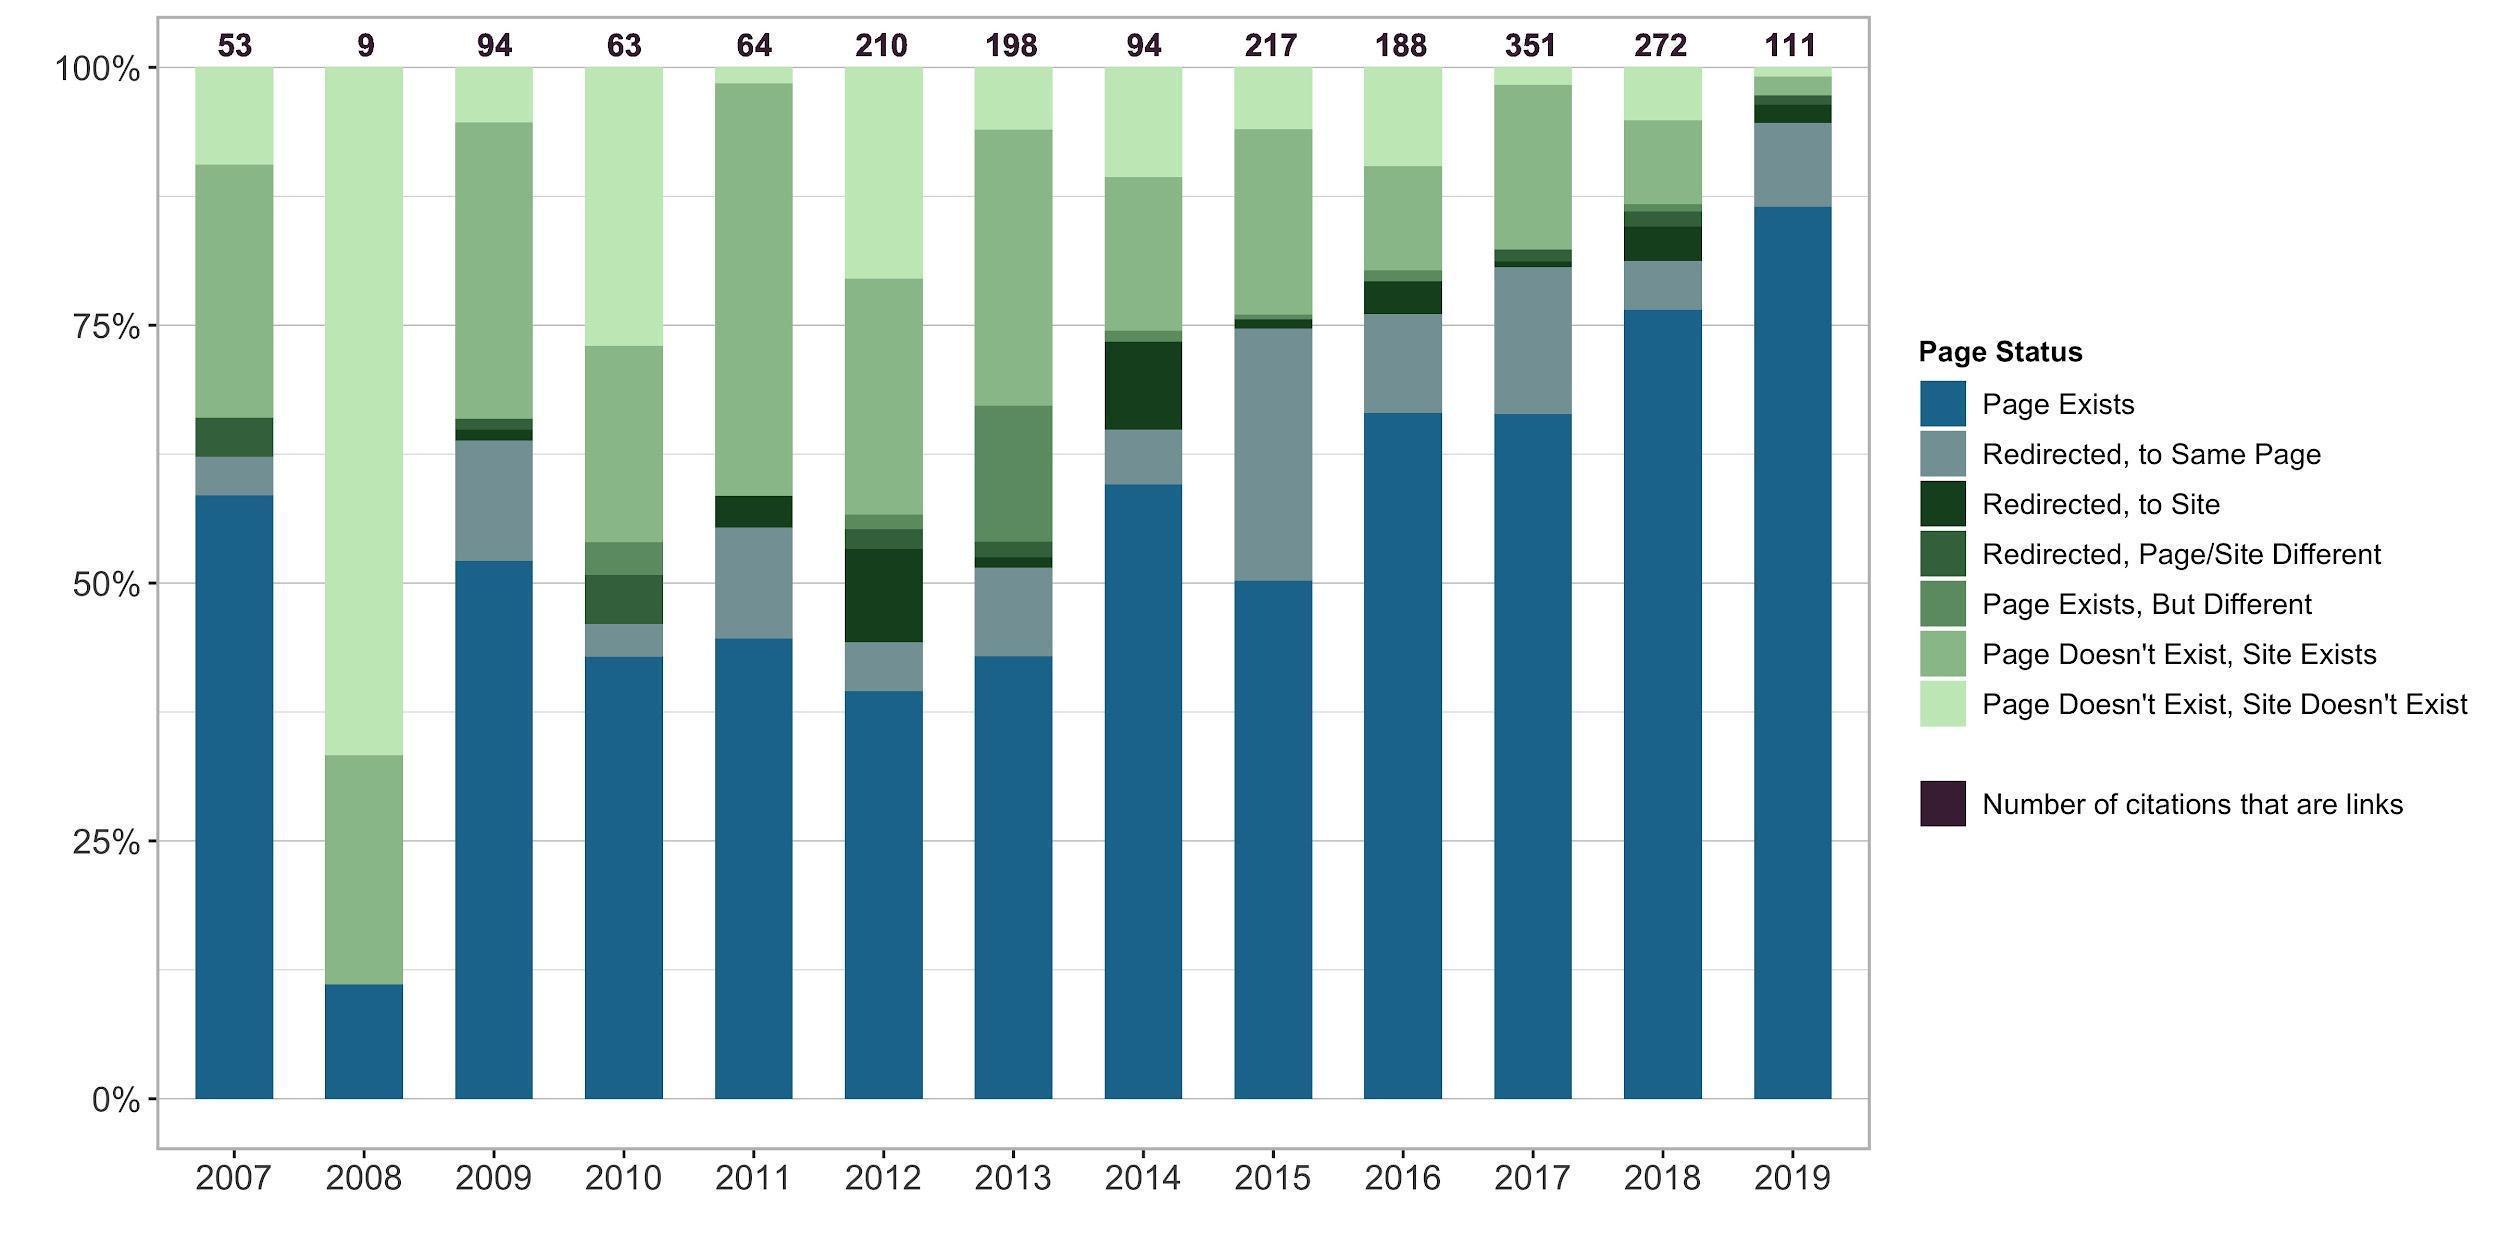 Image of a bar chart in shades of green and blue. 